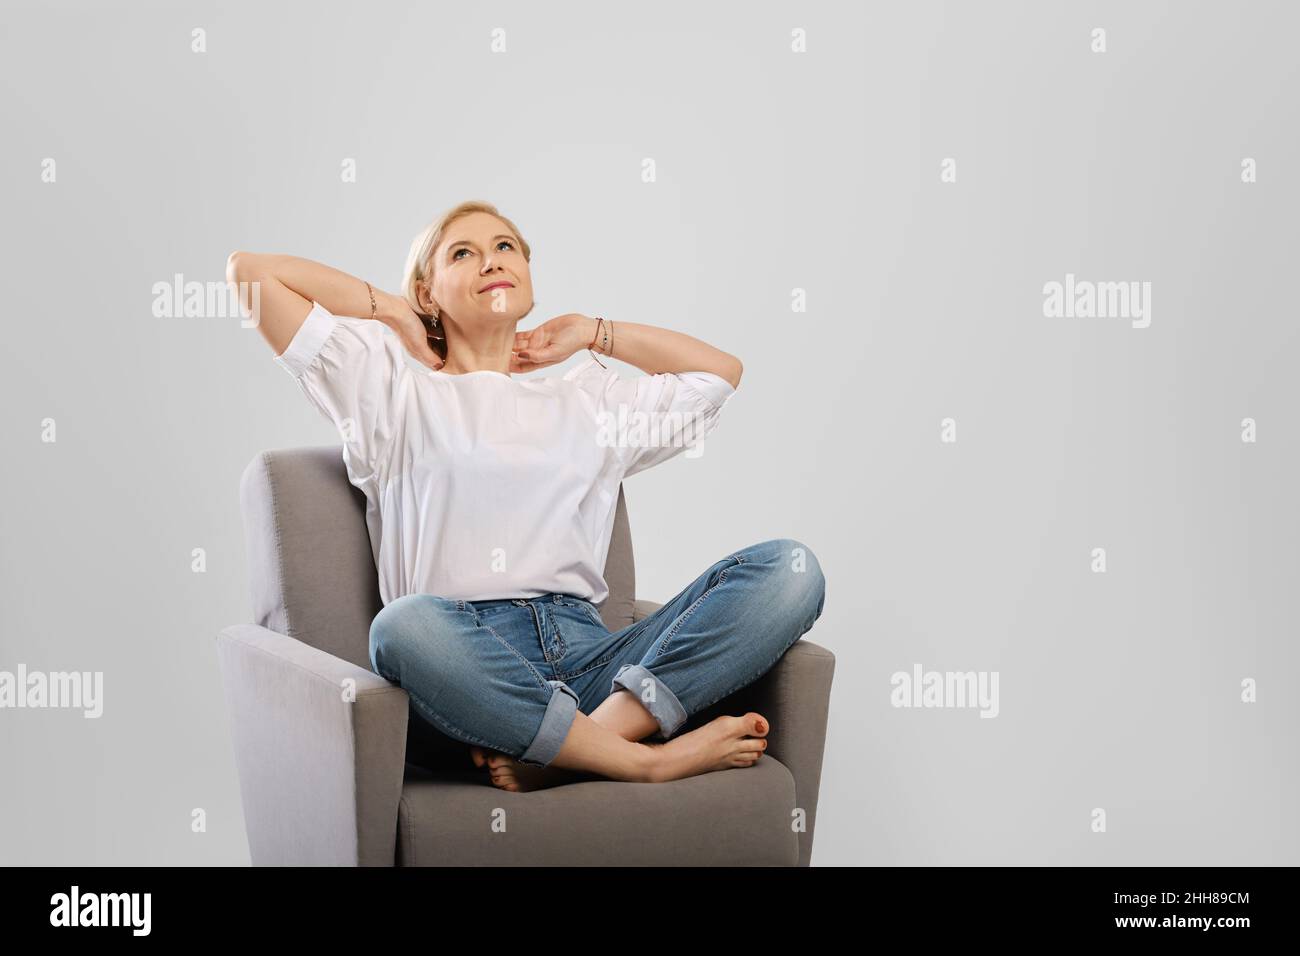 Senior woman relaxing in an armchair crossing legs and hold hands behind her head Stock Photo